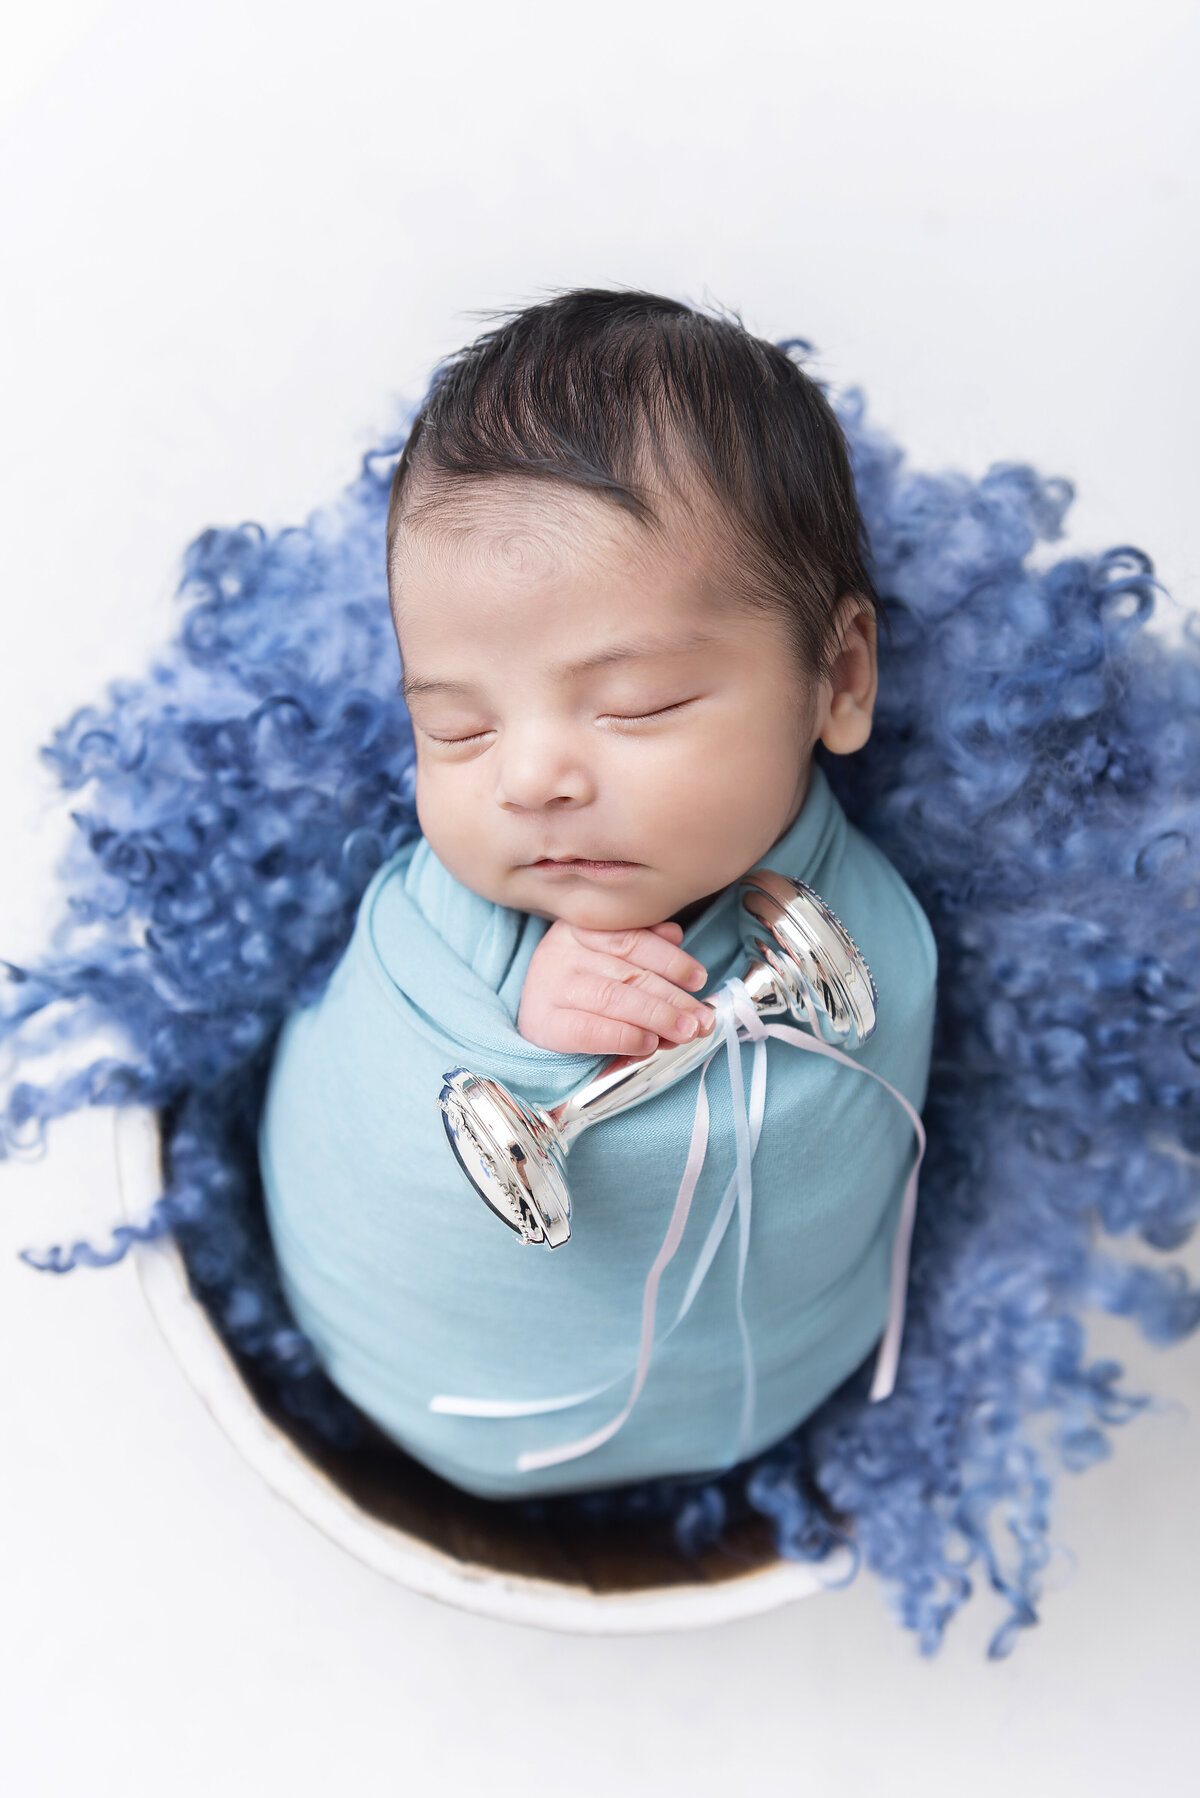 A newborn baby sleeps in a wooden bucket and blue blanket holding a tiny metal rattle posed by an Atlanta newborn photographer